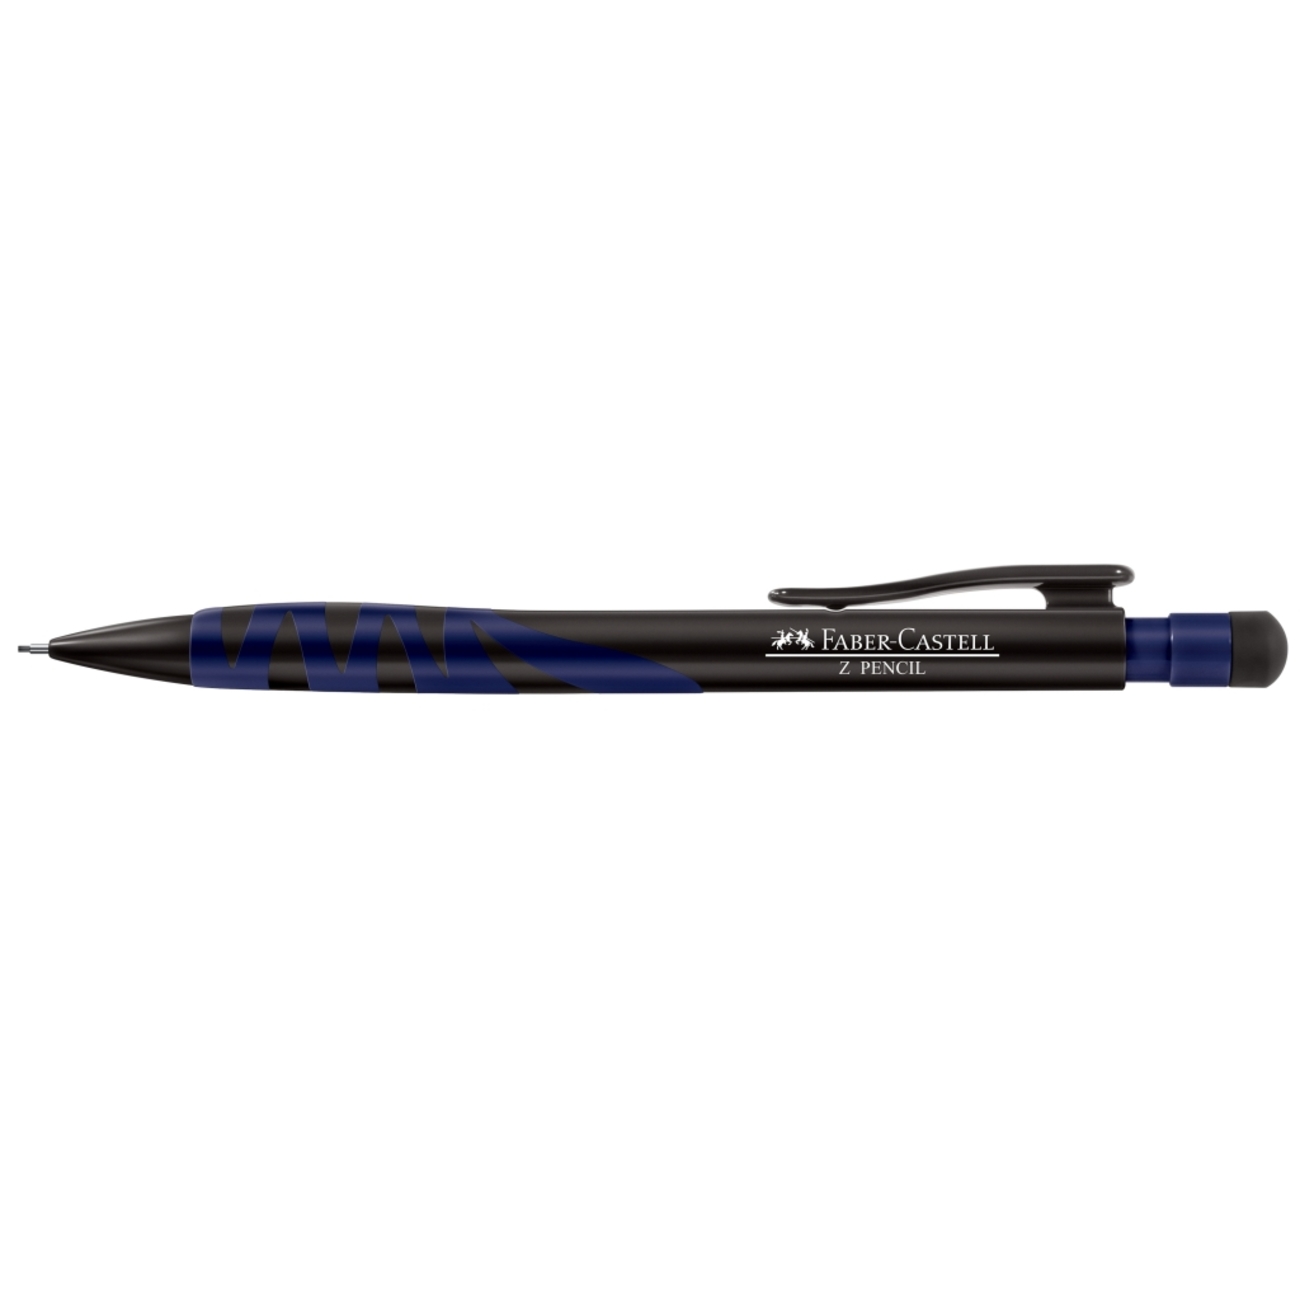 Lapiseira Faber-Castell ZPencil 0.5mm Ctl c/ 1 Unid (24 Ctl/cada)